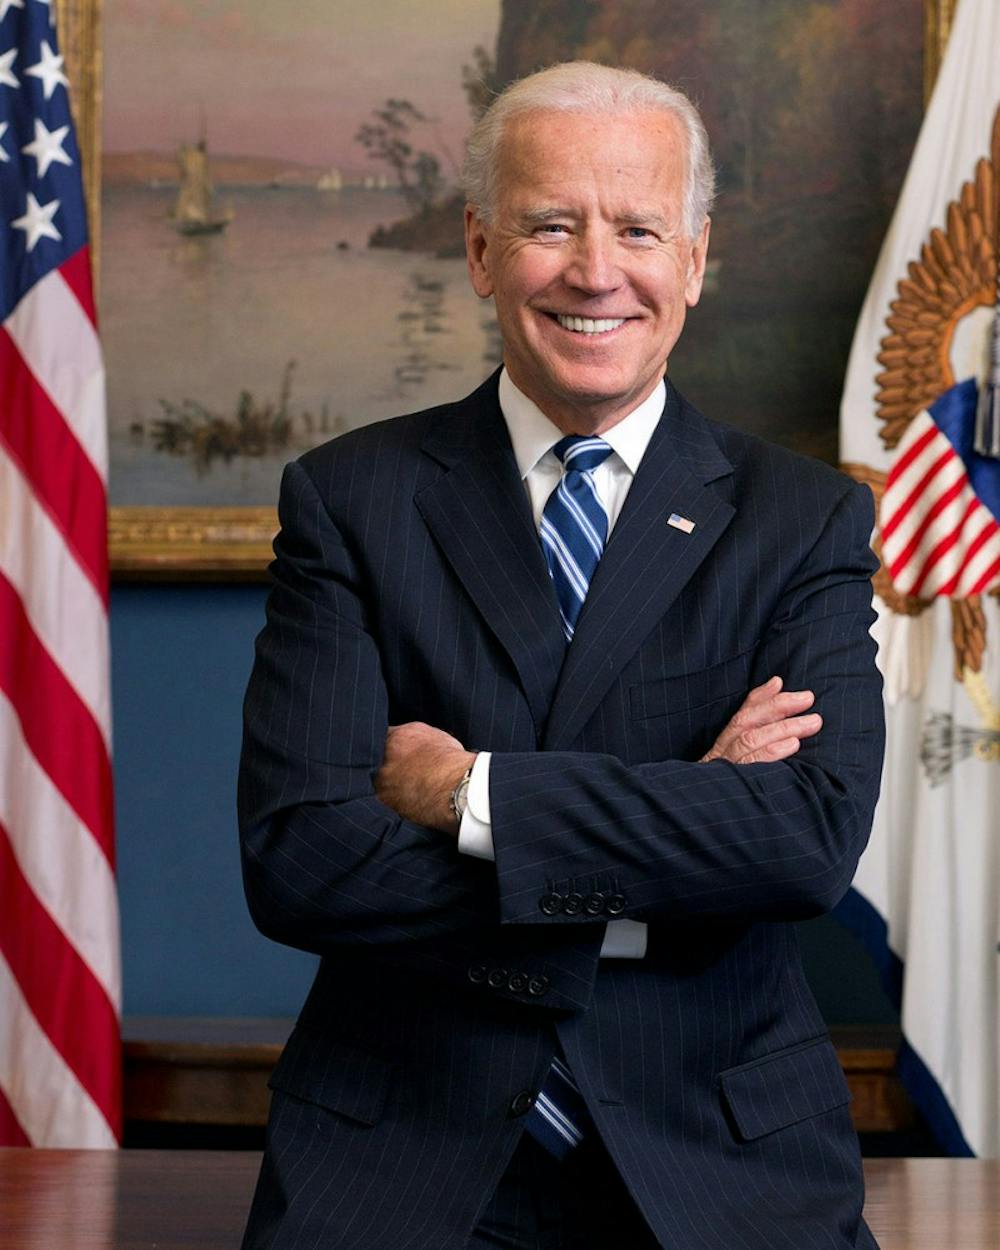 <p>Altogether, Biden’s personal struggles and tragedies have imbued him with a certain sense of compassion and empathy that is rare amongst today’s politicians.</p>